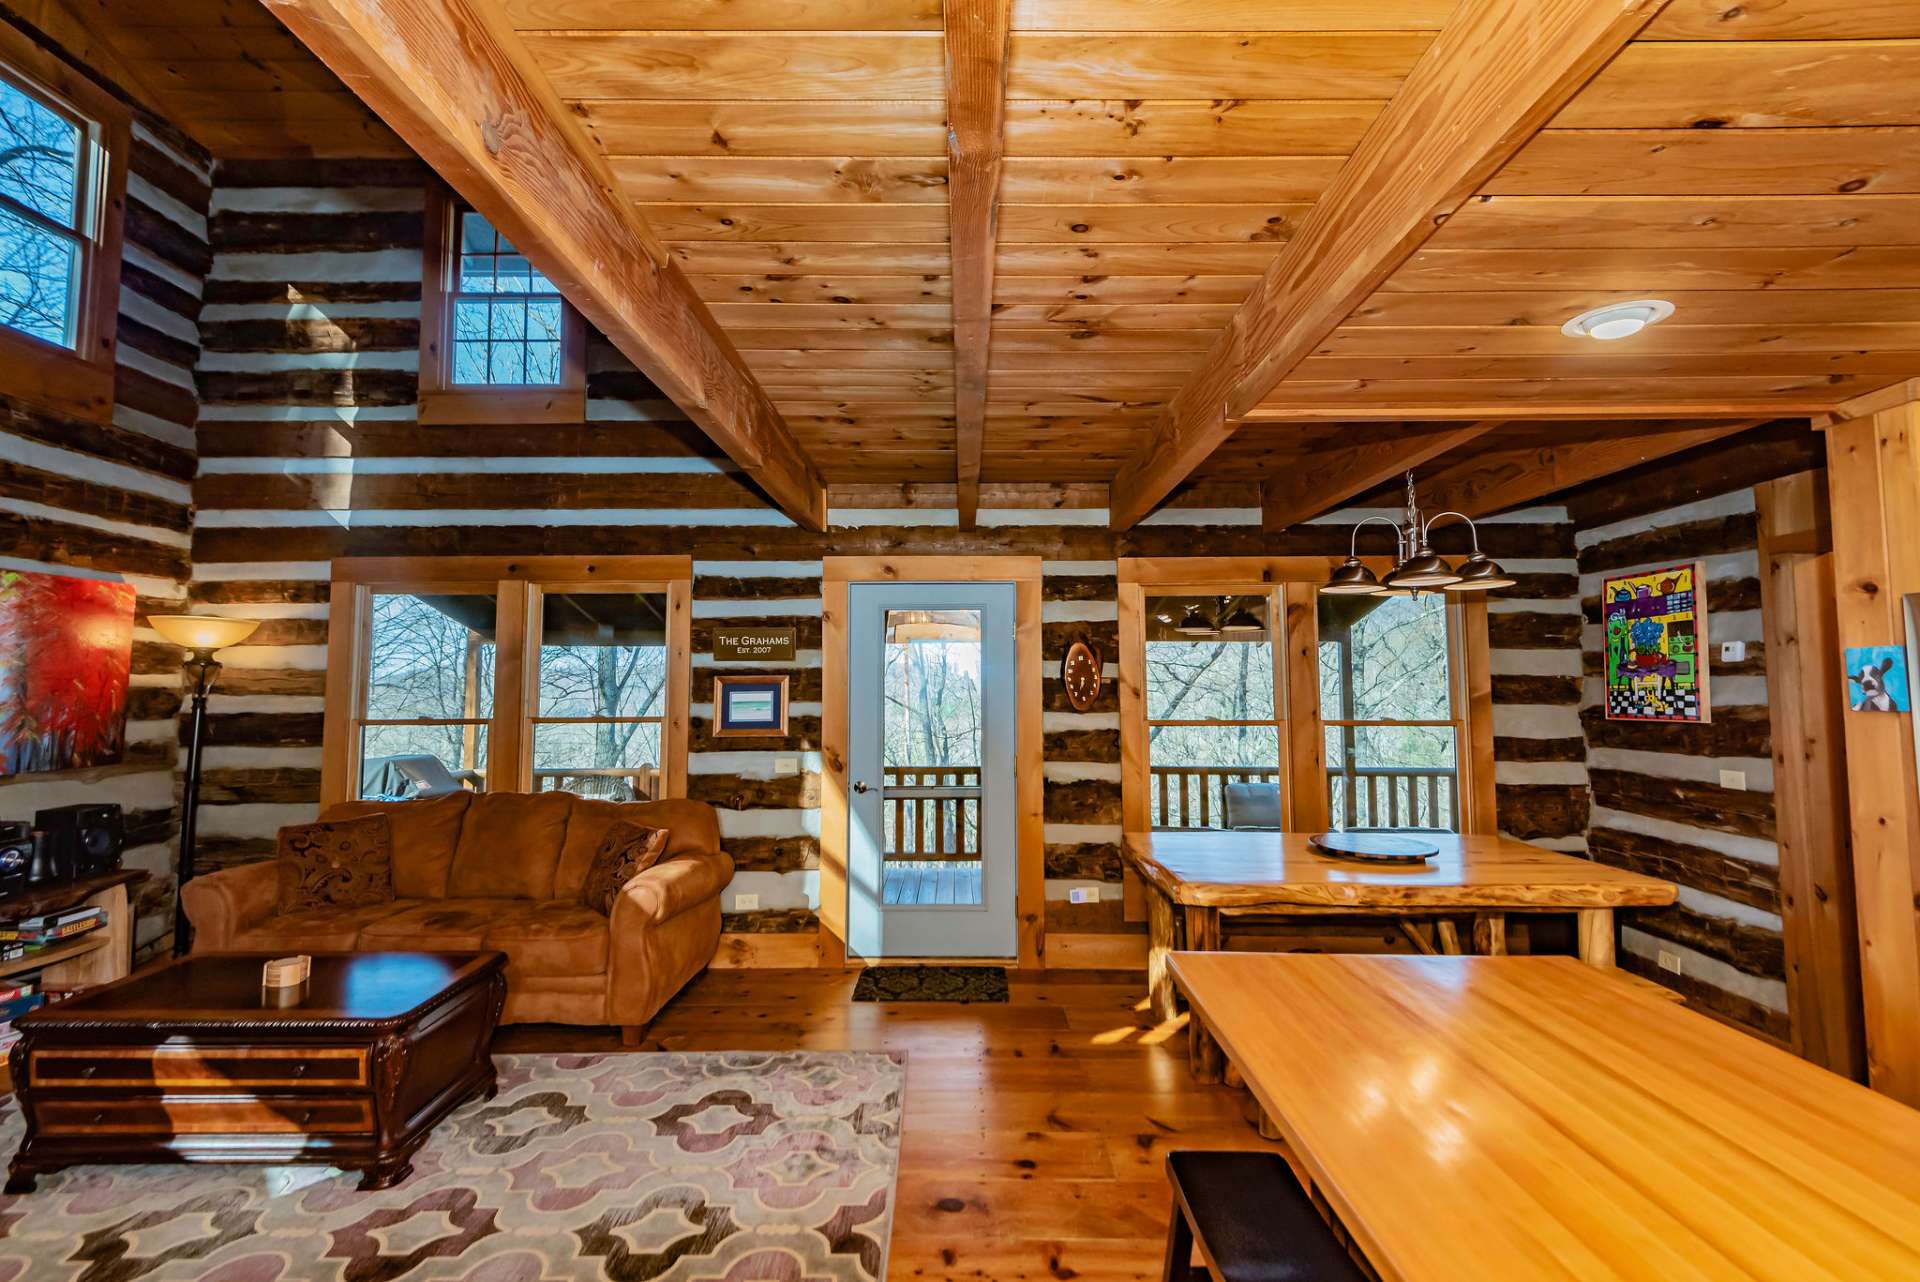 Entering from the front door, the open floor plan draws you in with a peek to the back deck.